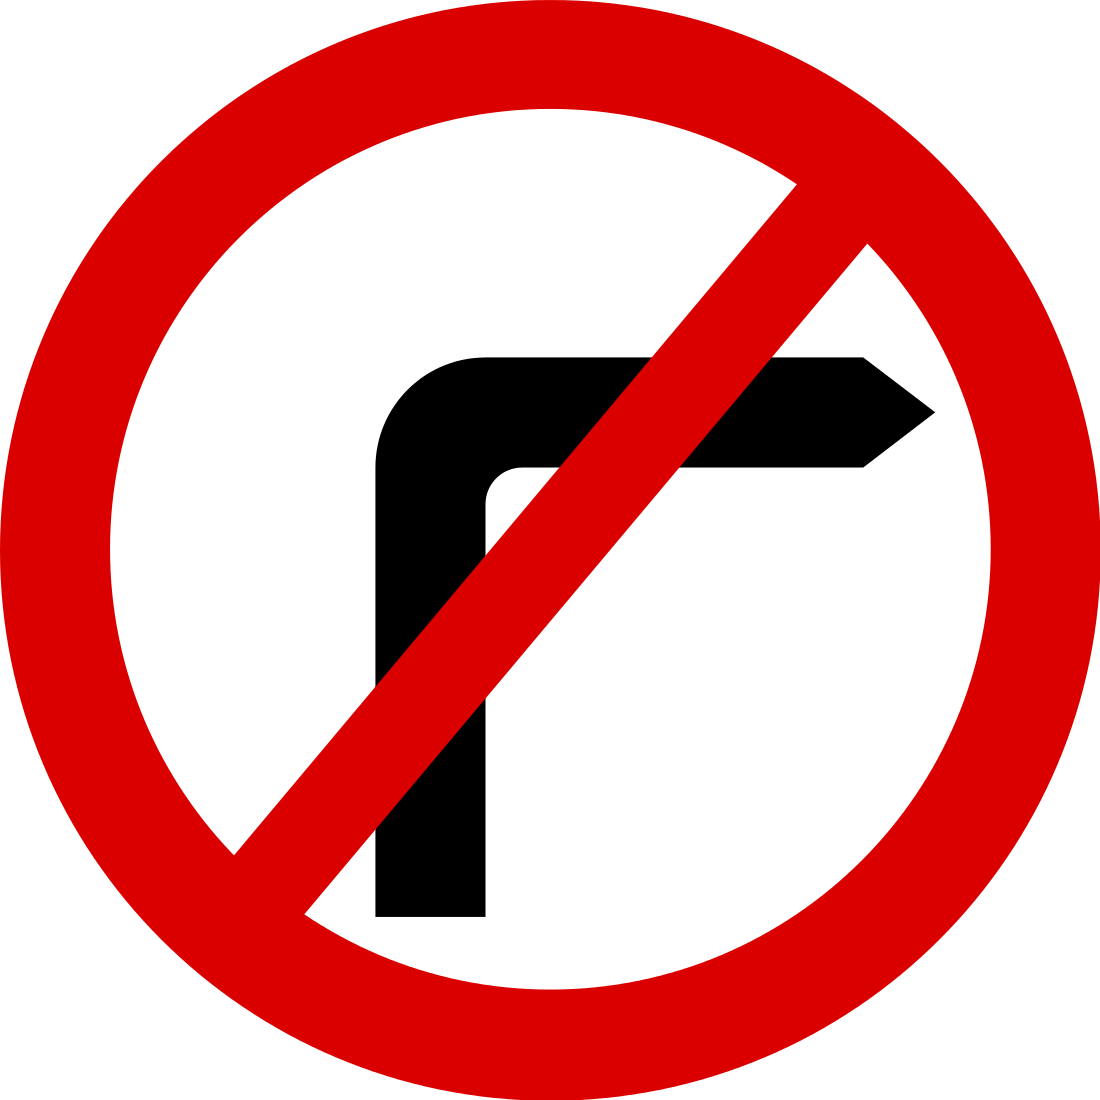 No Right Turn - Road Signs And Symbols (1100x1100)